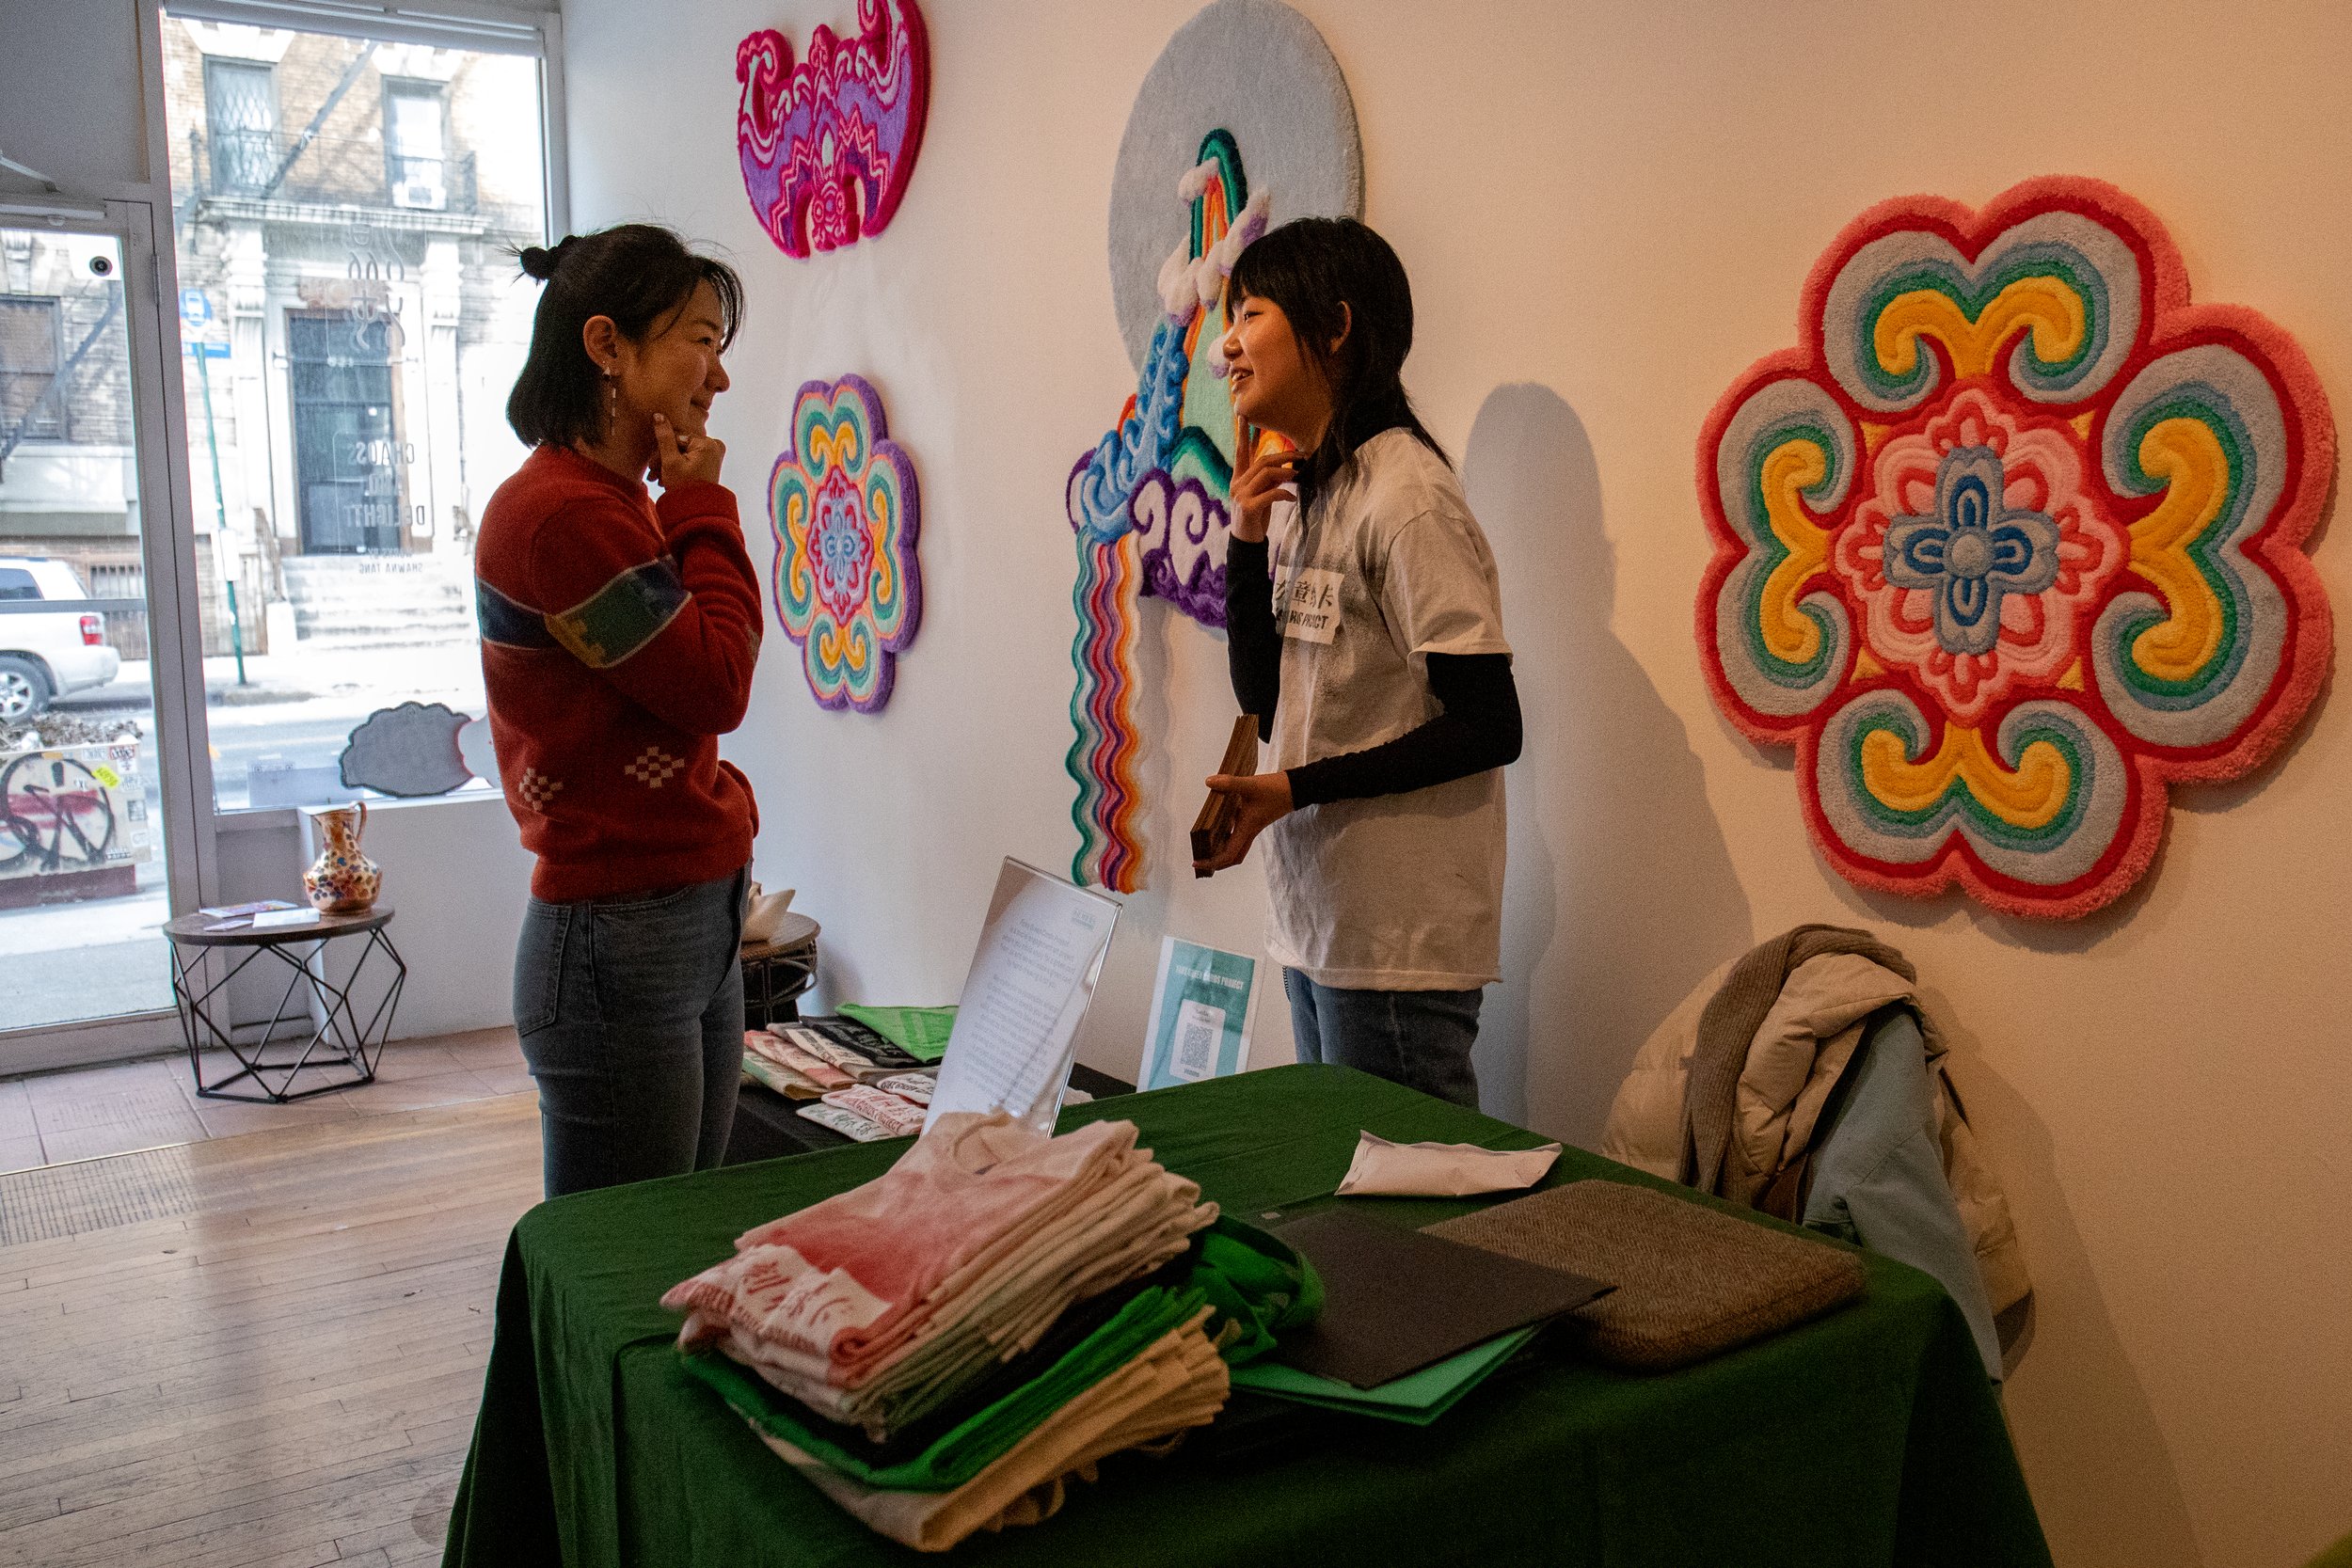  Youkun Zhou, left, and Xuan Liu discuss their setup and prepare before the opening of the Market of Dreams. The fair featured various artists and vendors. 